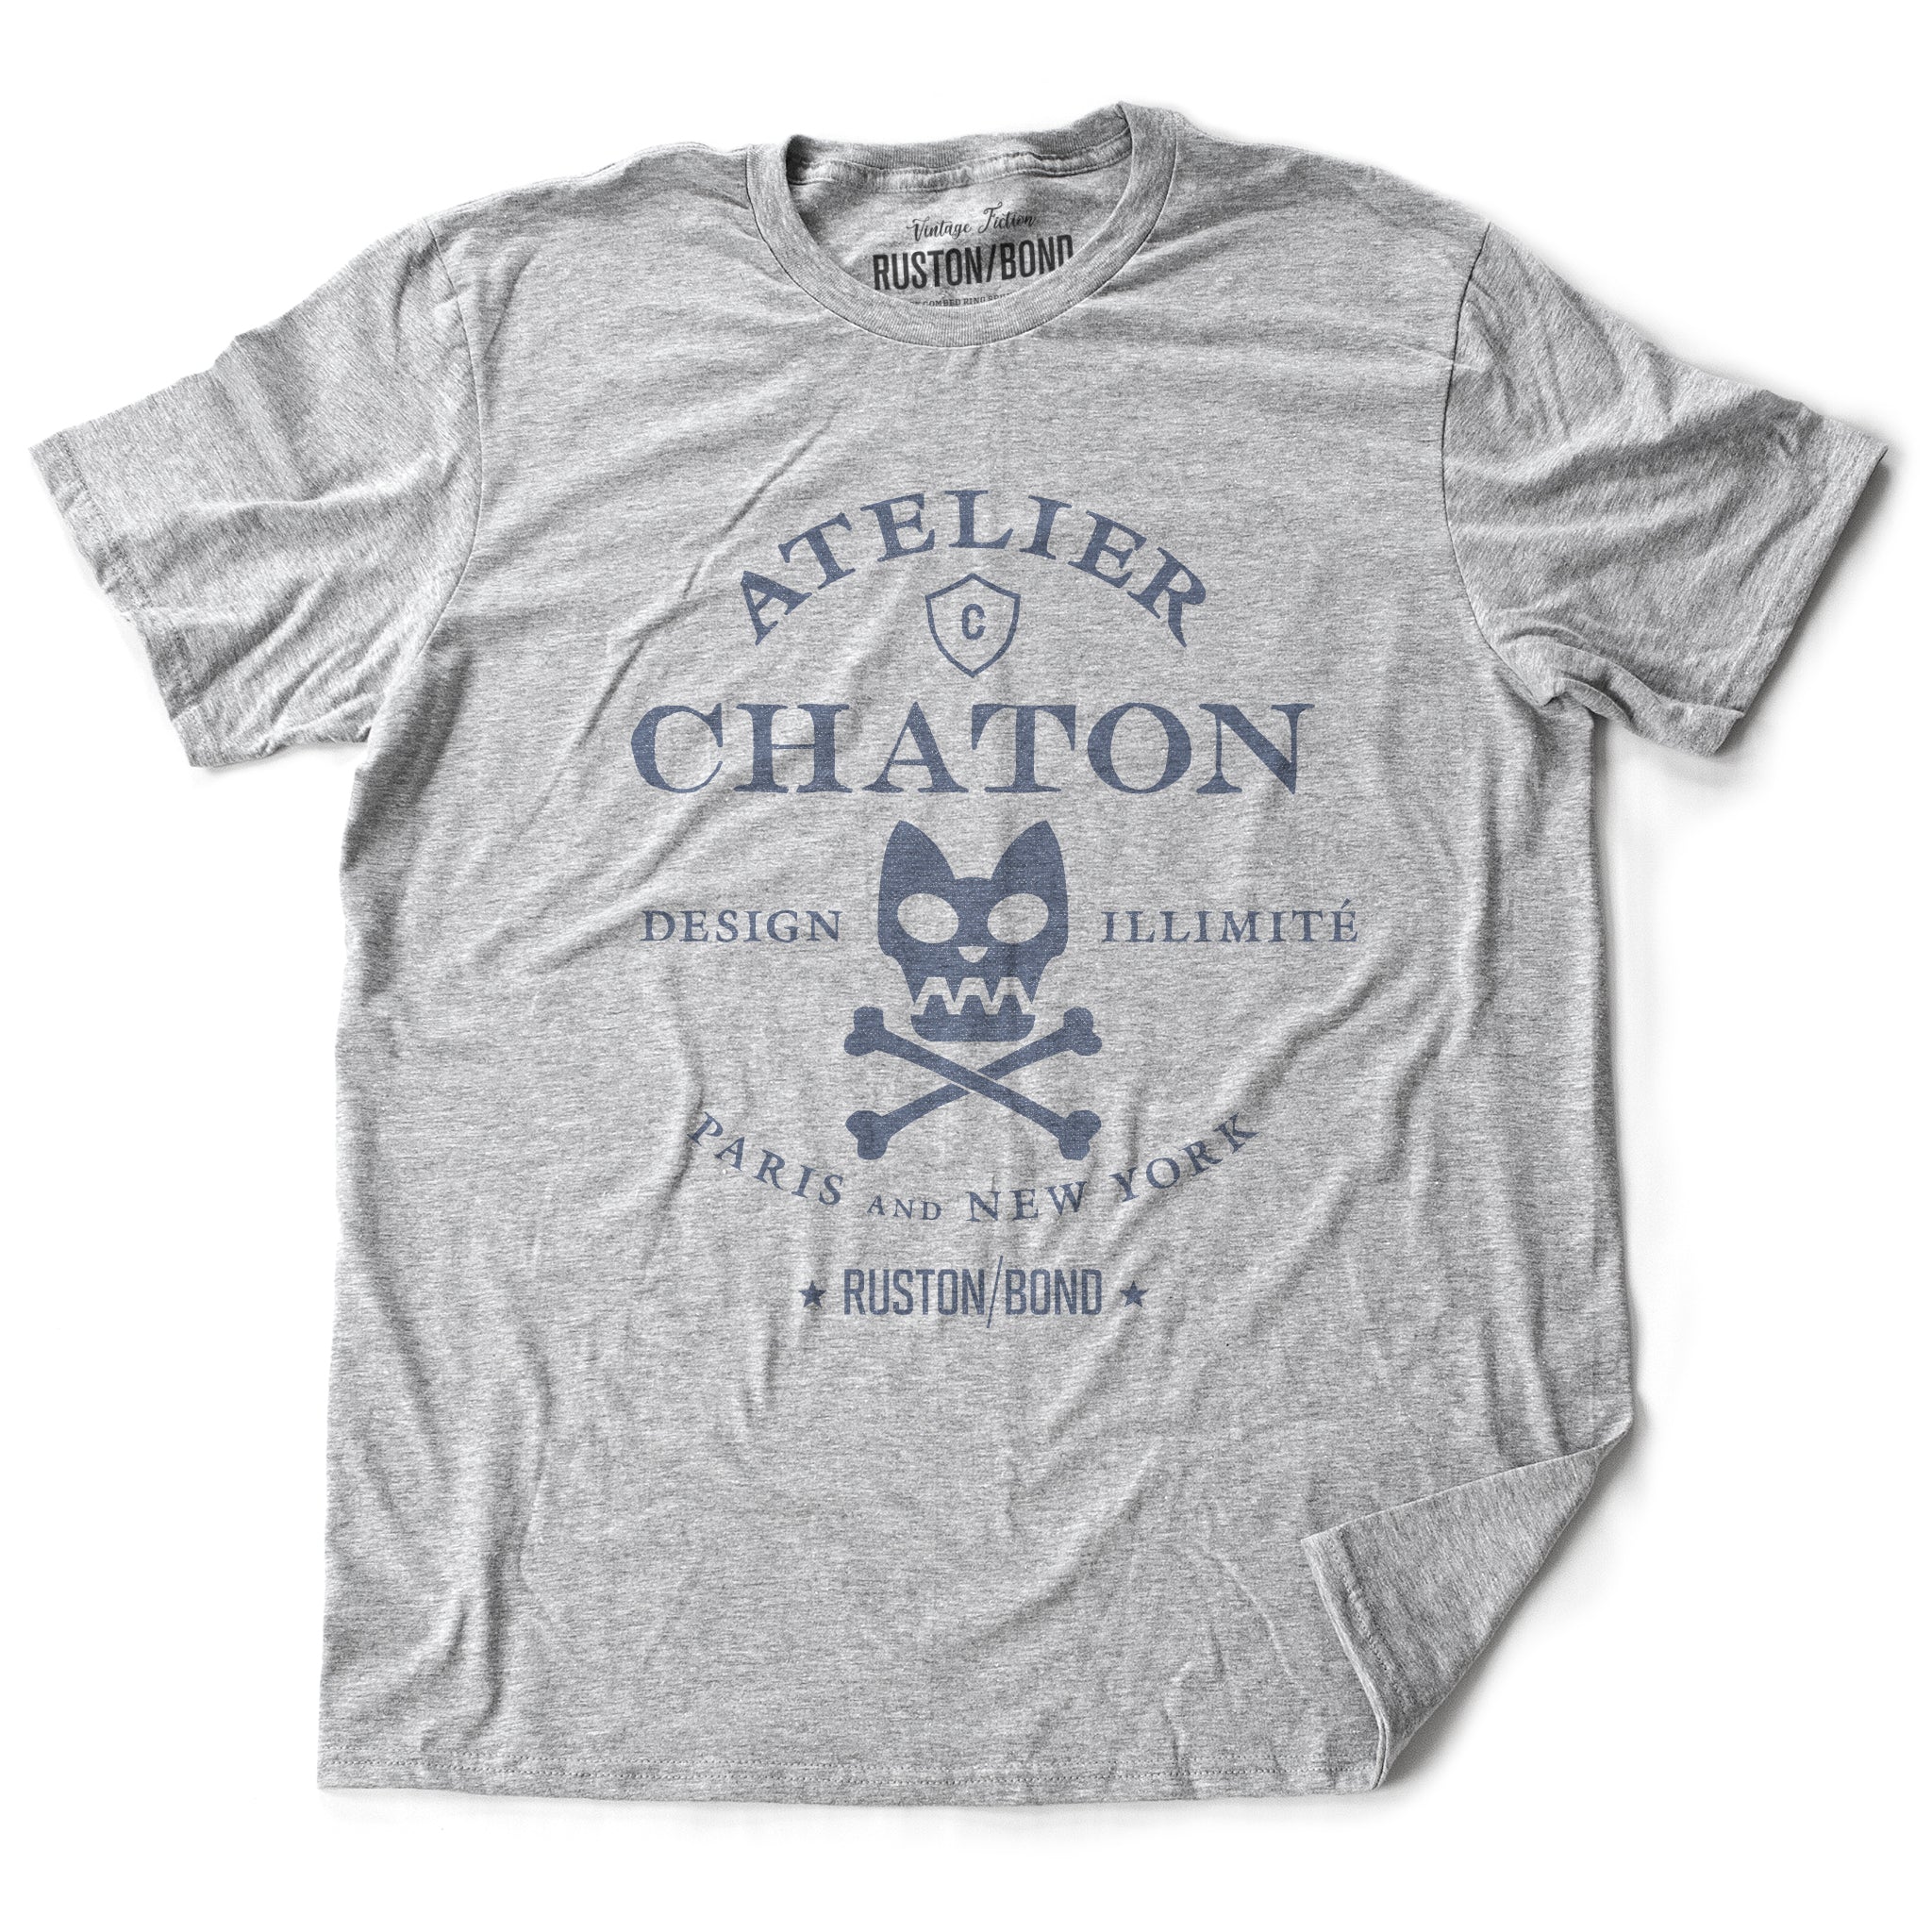 Athletic Gray retro, vintage-inspired fashion t-shirt for a fictional graphic design studio in Paris and New York, featuring a graphic of a cat skull and cross bones, from brand Ruston/Bond. From wolfsaint.net